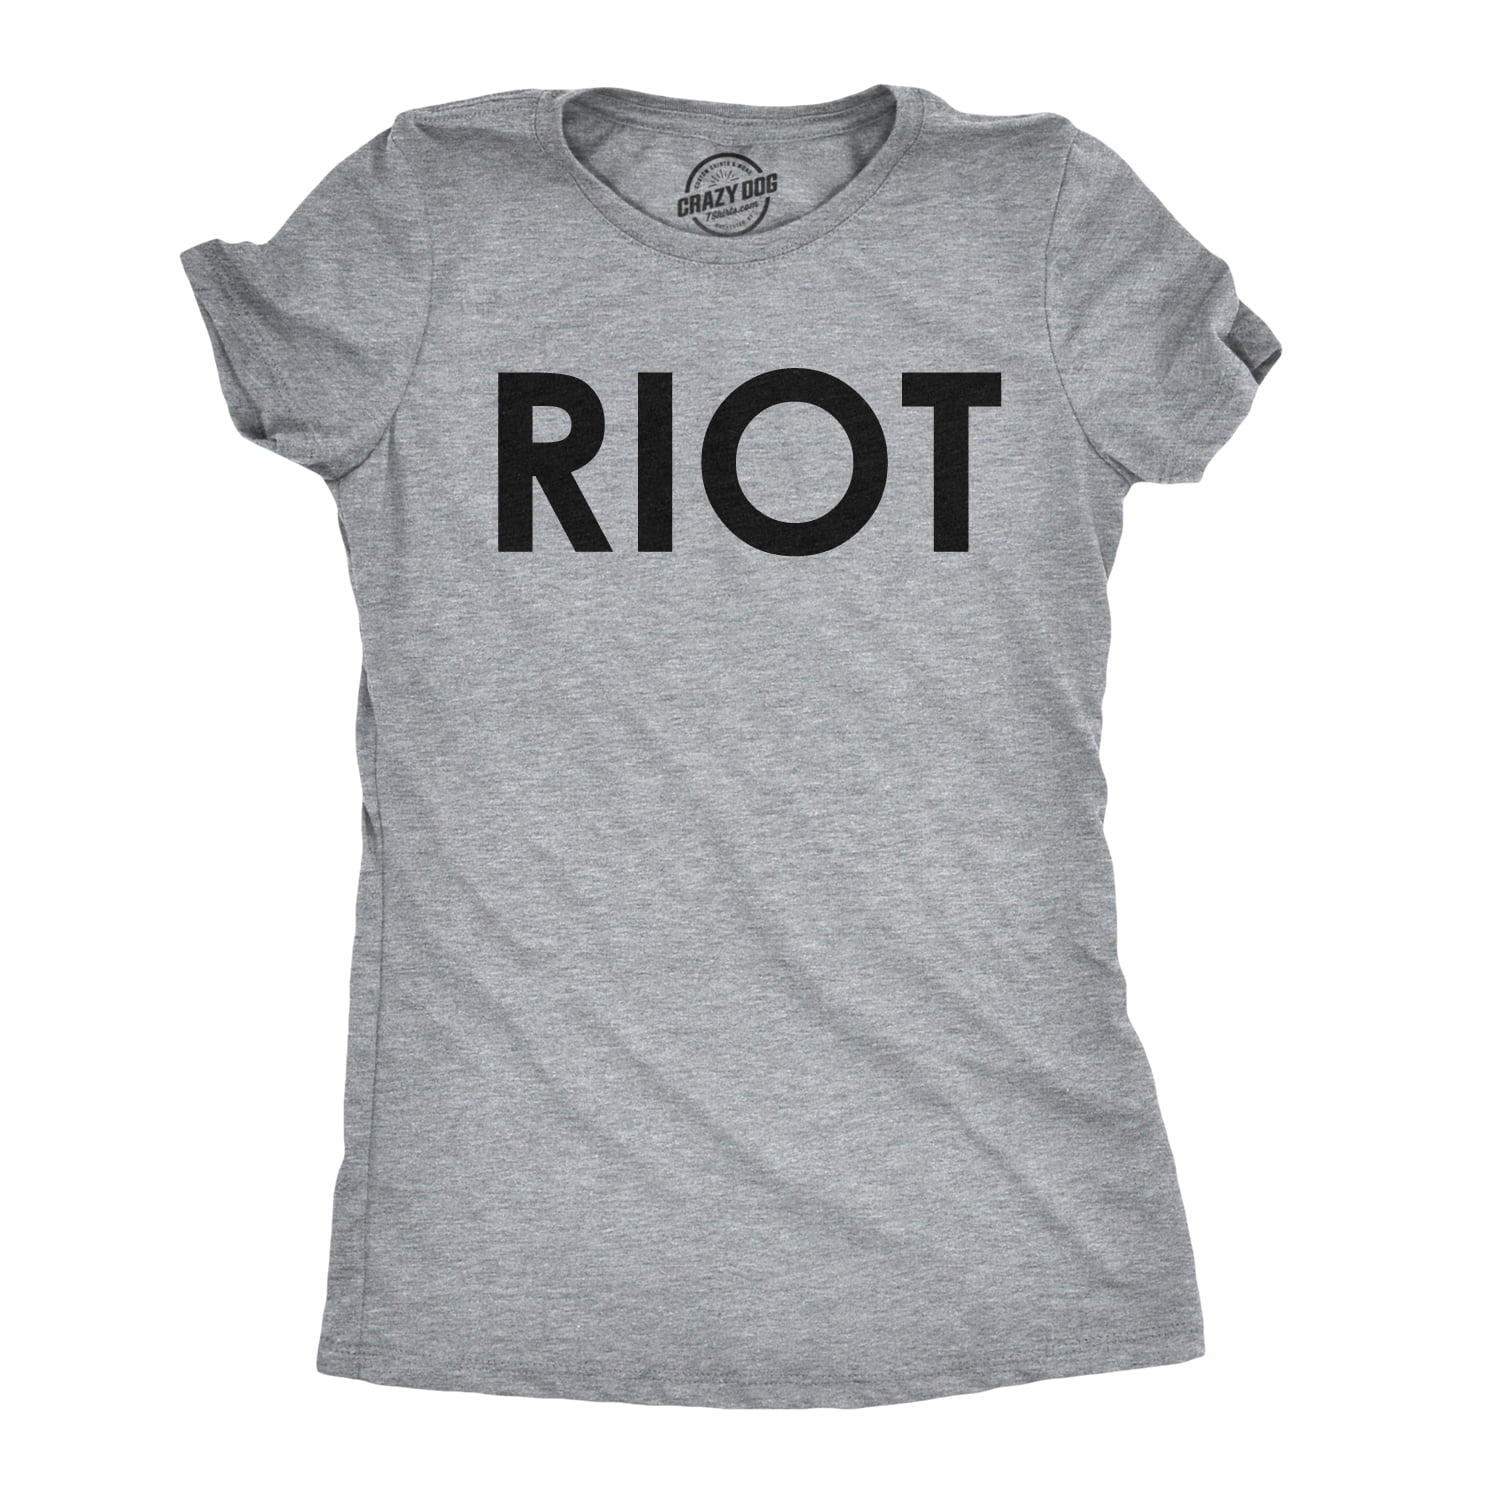 Womens Riot T shirt Funny Shirt for Ladies National Novelty Tees Humor ...